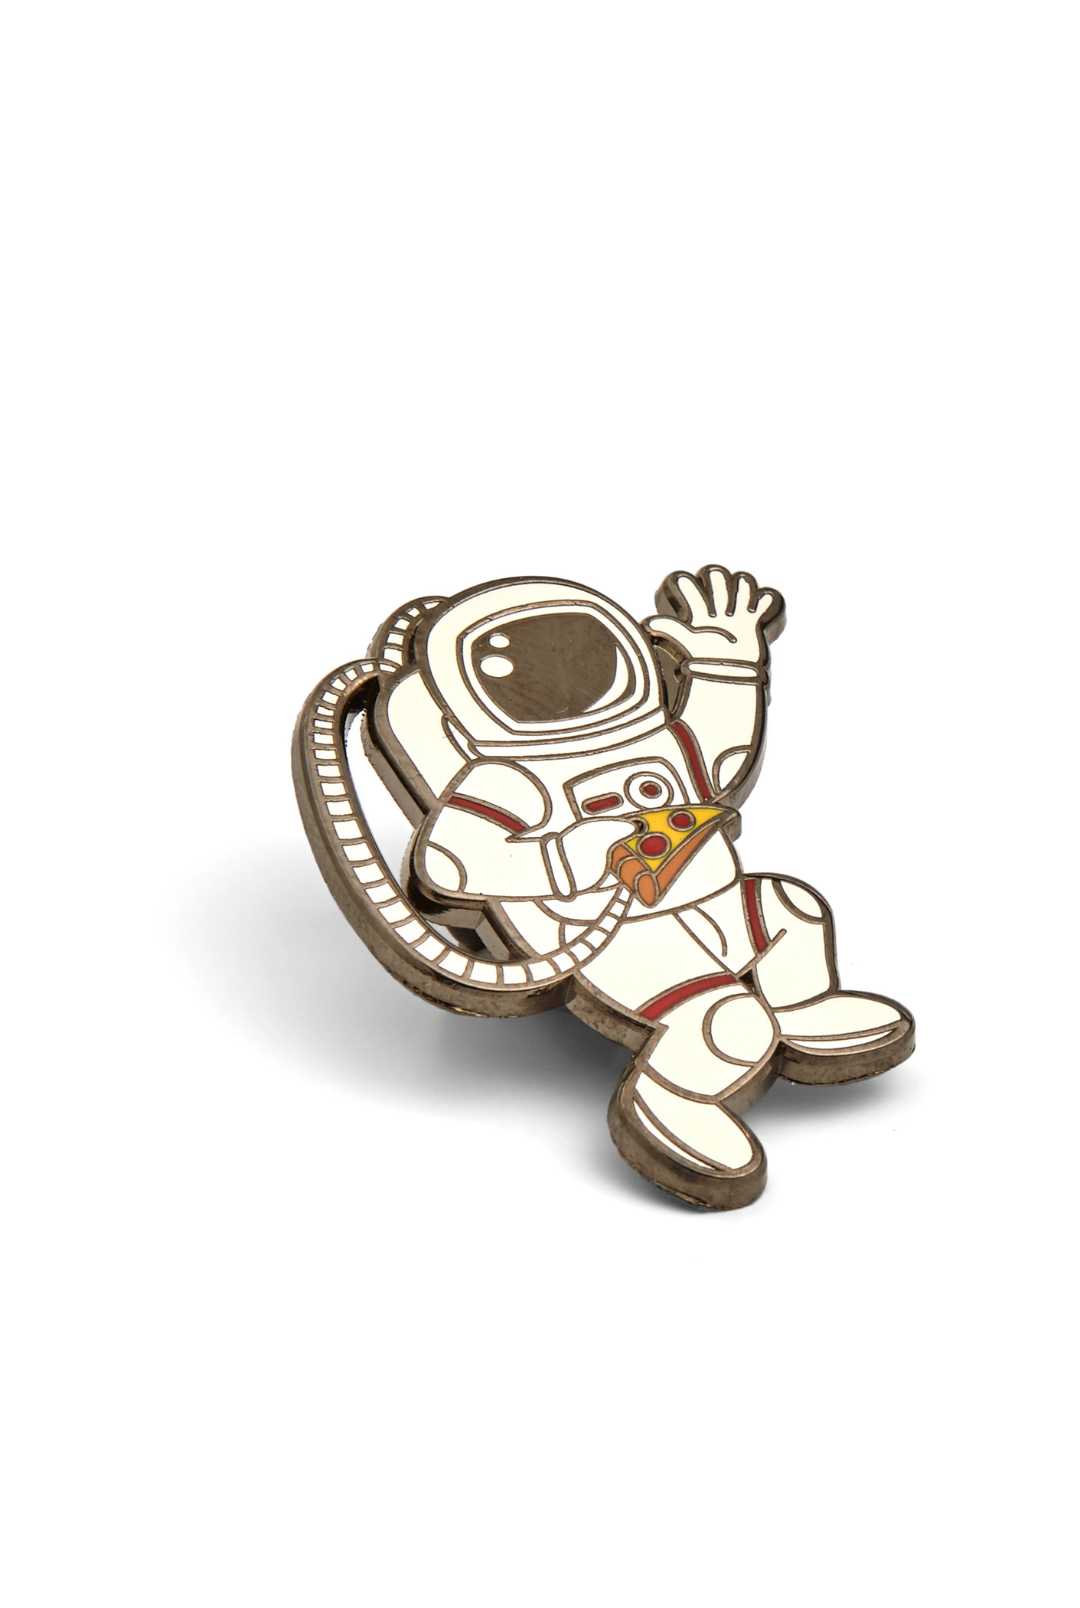 Pin on Outer Space